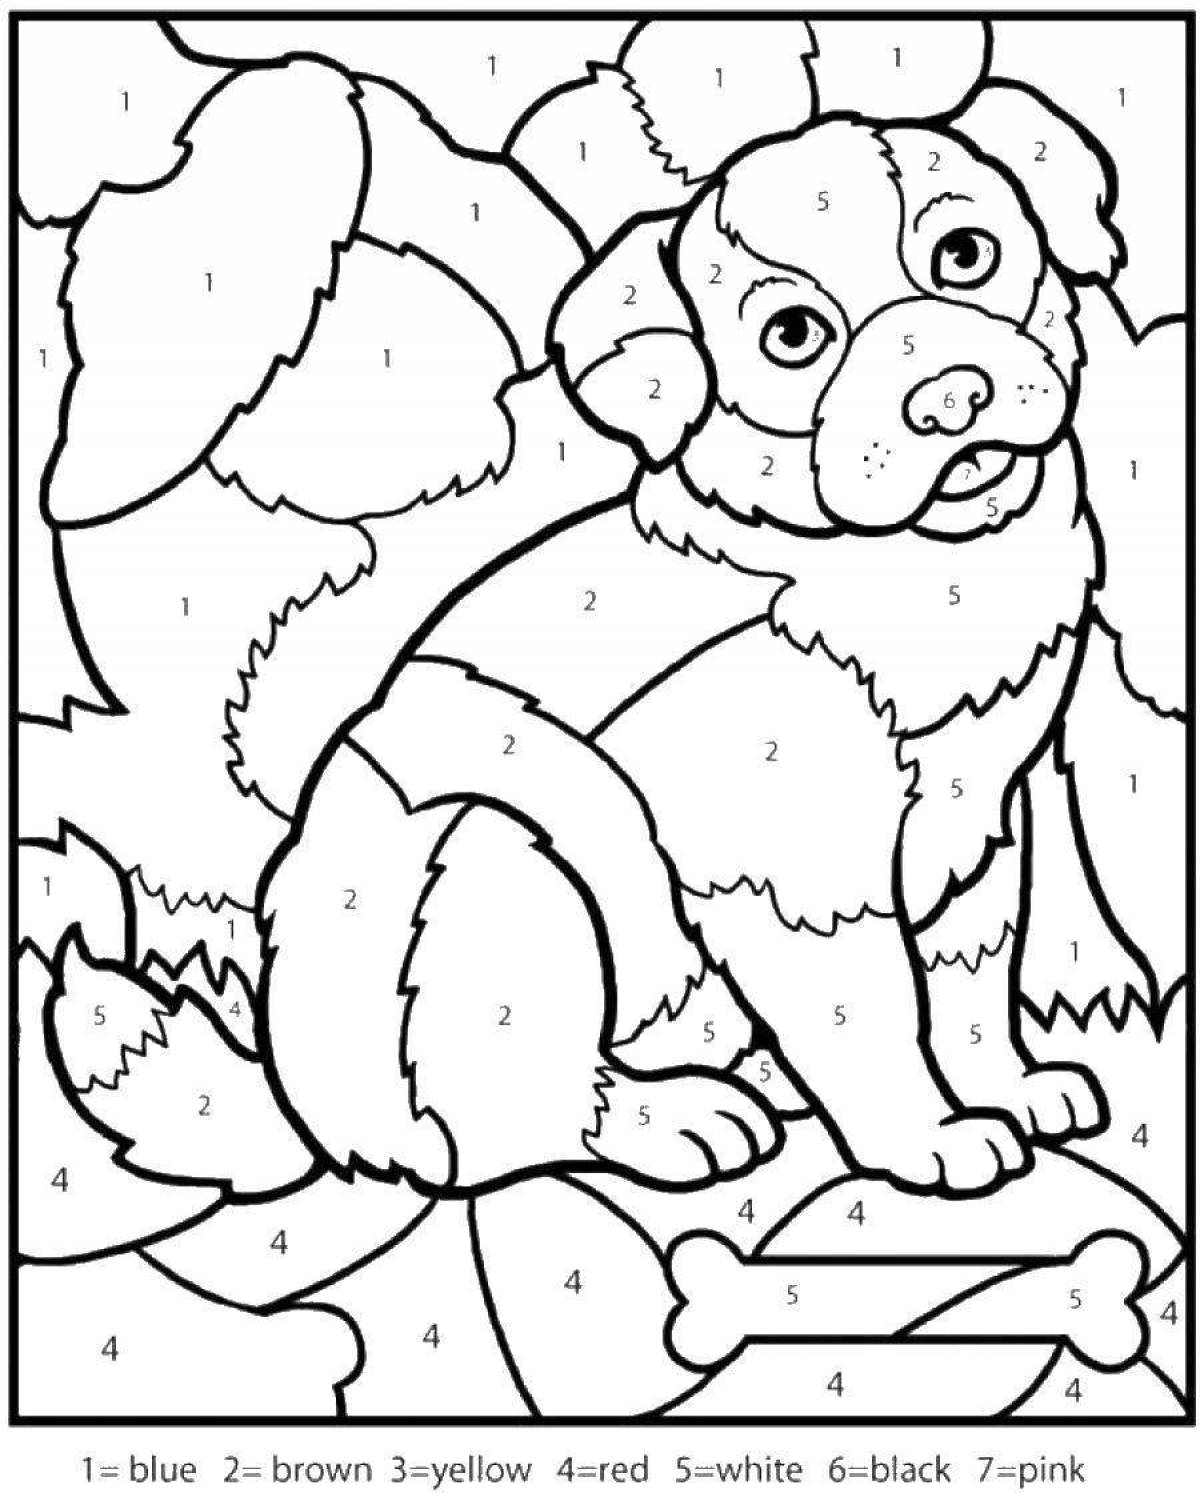 Color-explosive coloring page by phone numbers